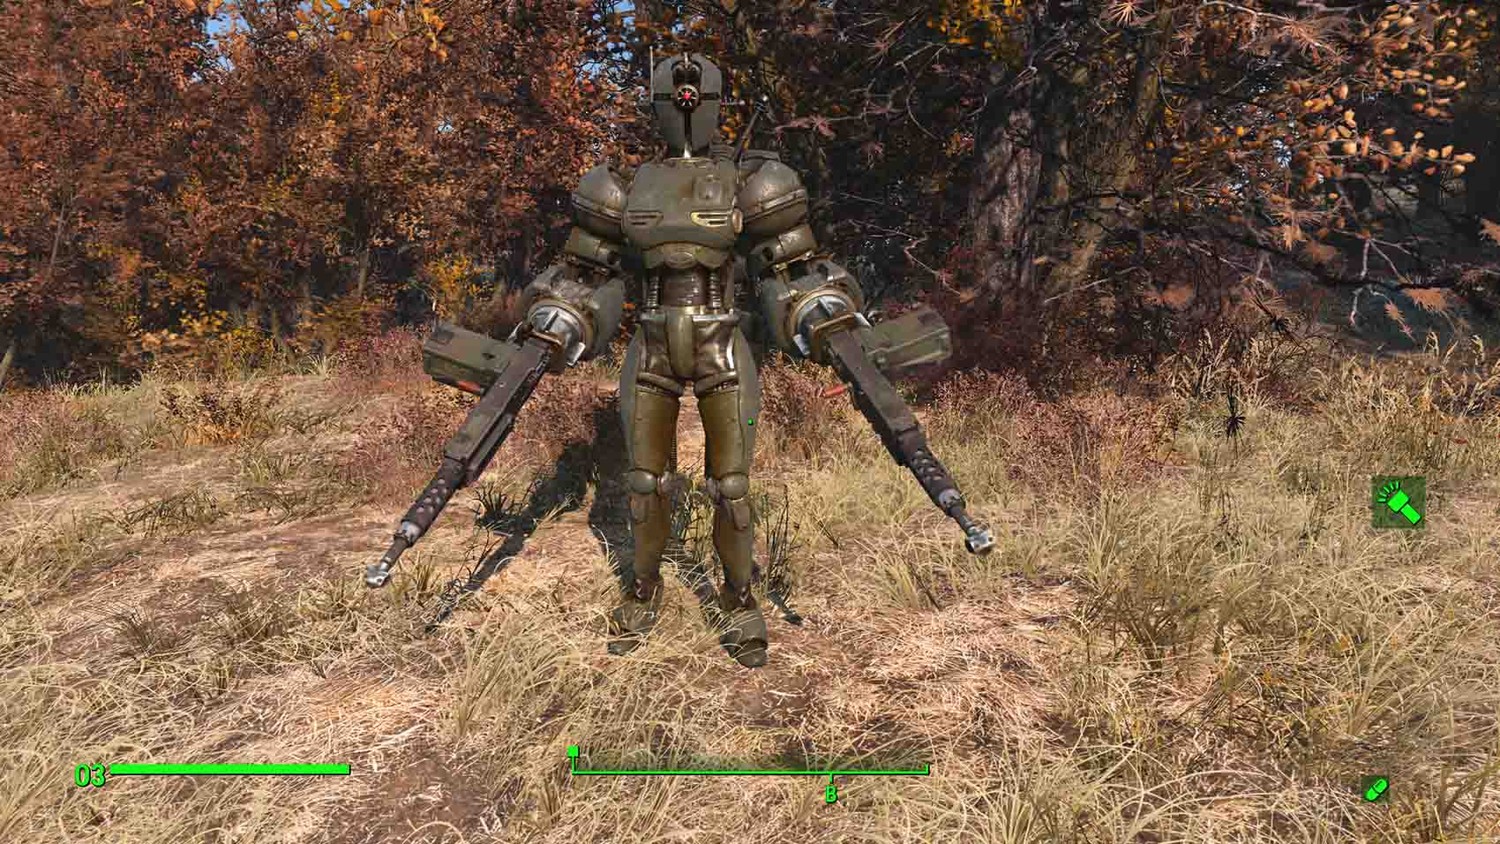 Holstered weapons fallout 4 фото 28